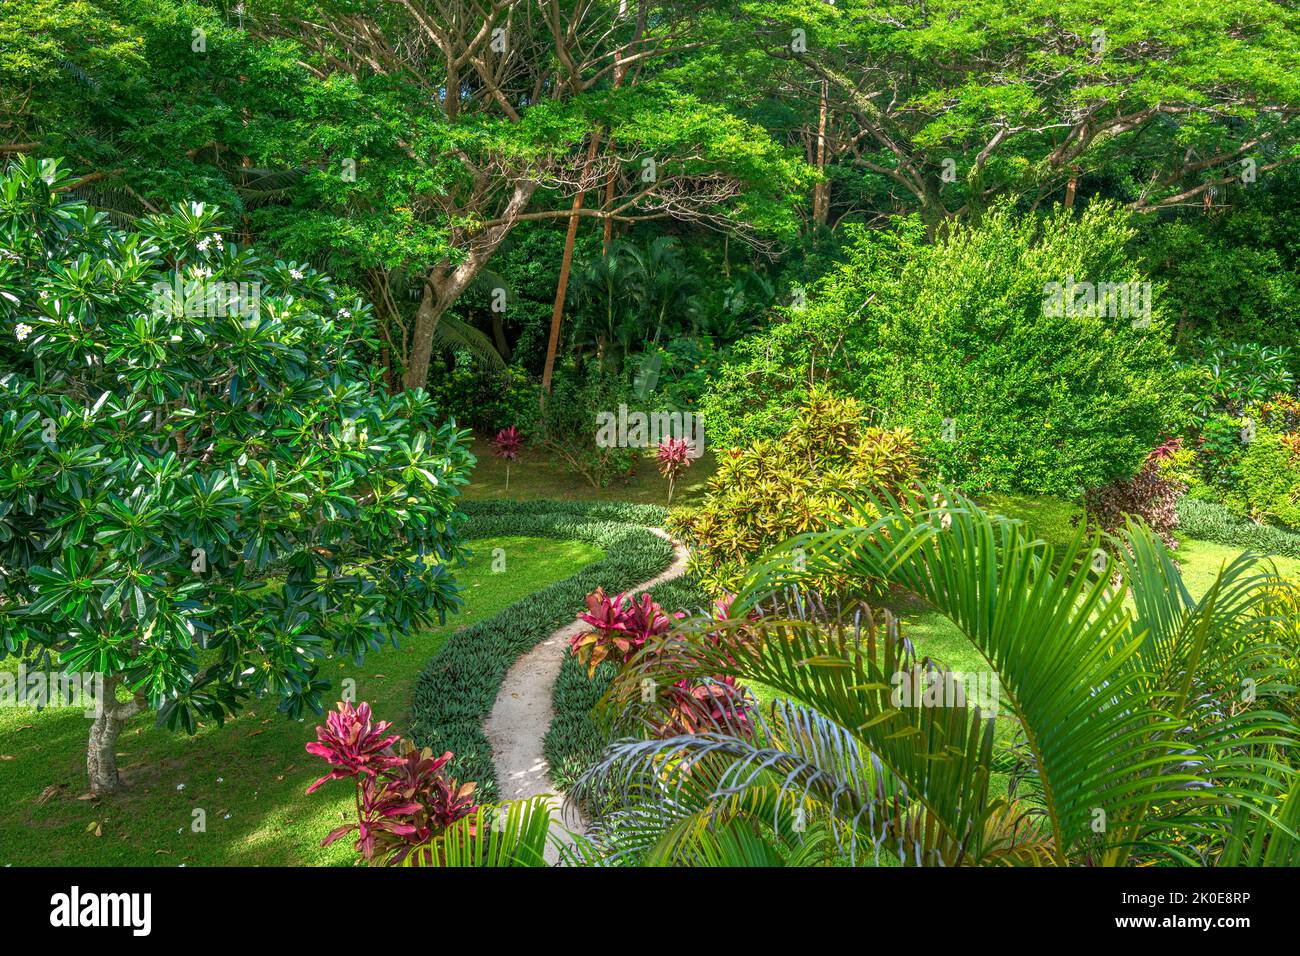 A walking path around a tropical resort's lush garden grounds shows healthy, vibrant trees, shrubs and other exotic growth. Stock Photo